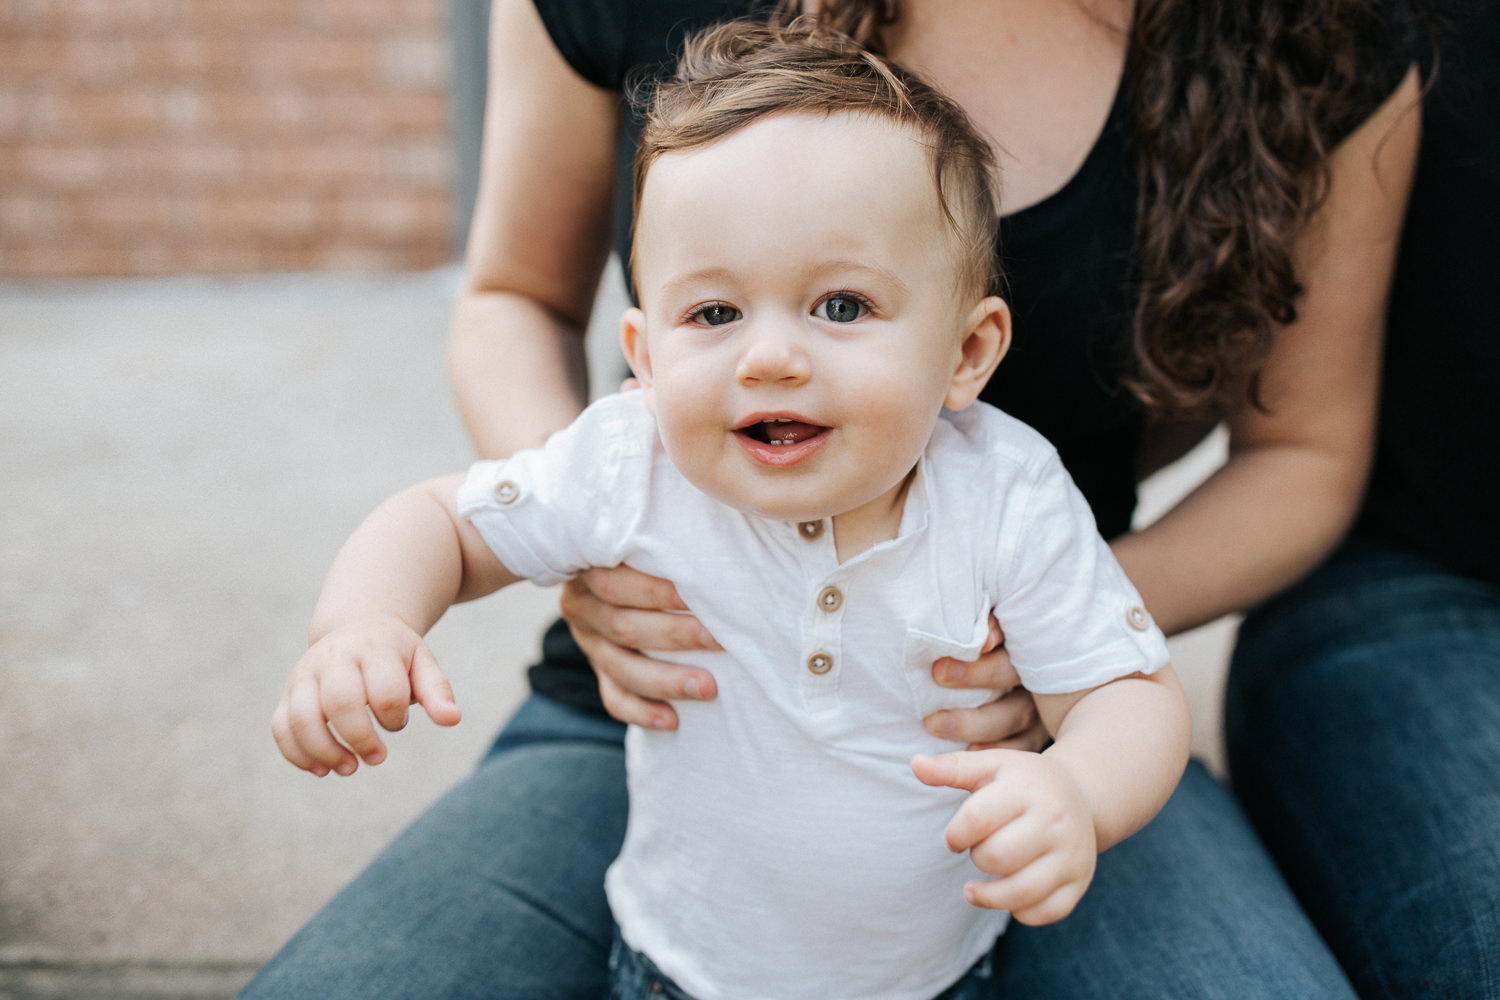 9 month old baby boy with dark hair in white t-shirt standing in mom's lap, smiling at camera - Barrie Golden Hour Photography